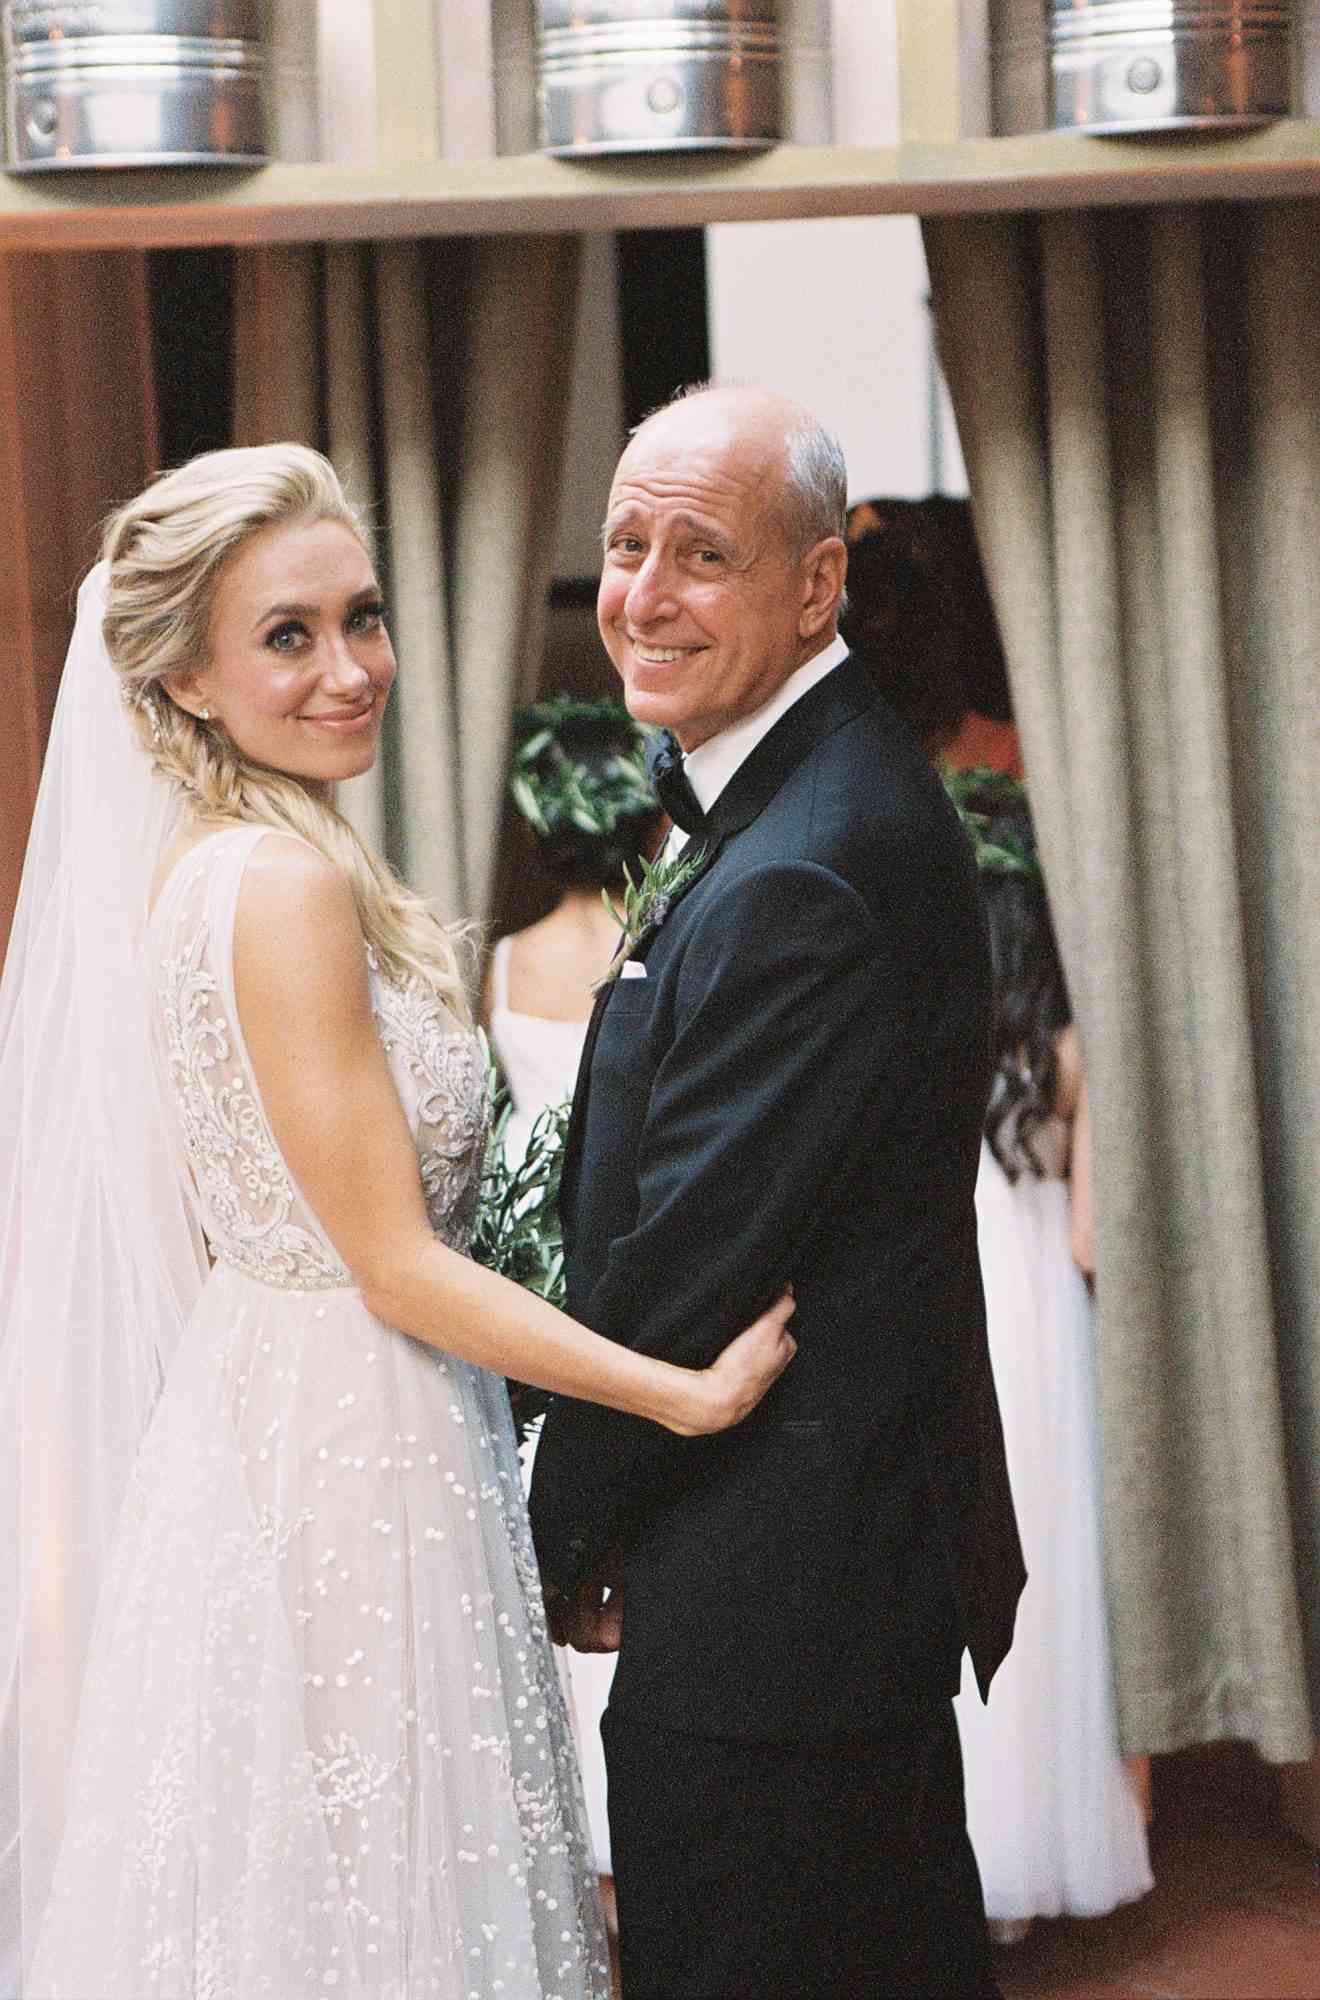 touching wedding moment father daughter